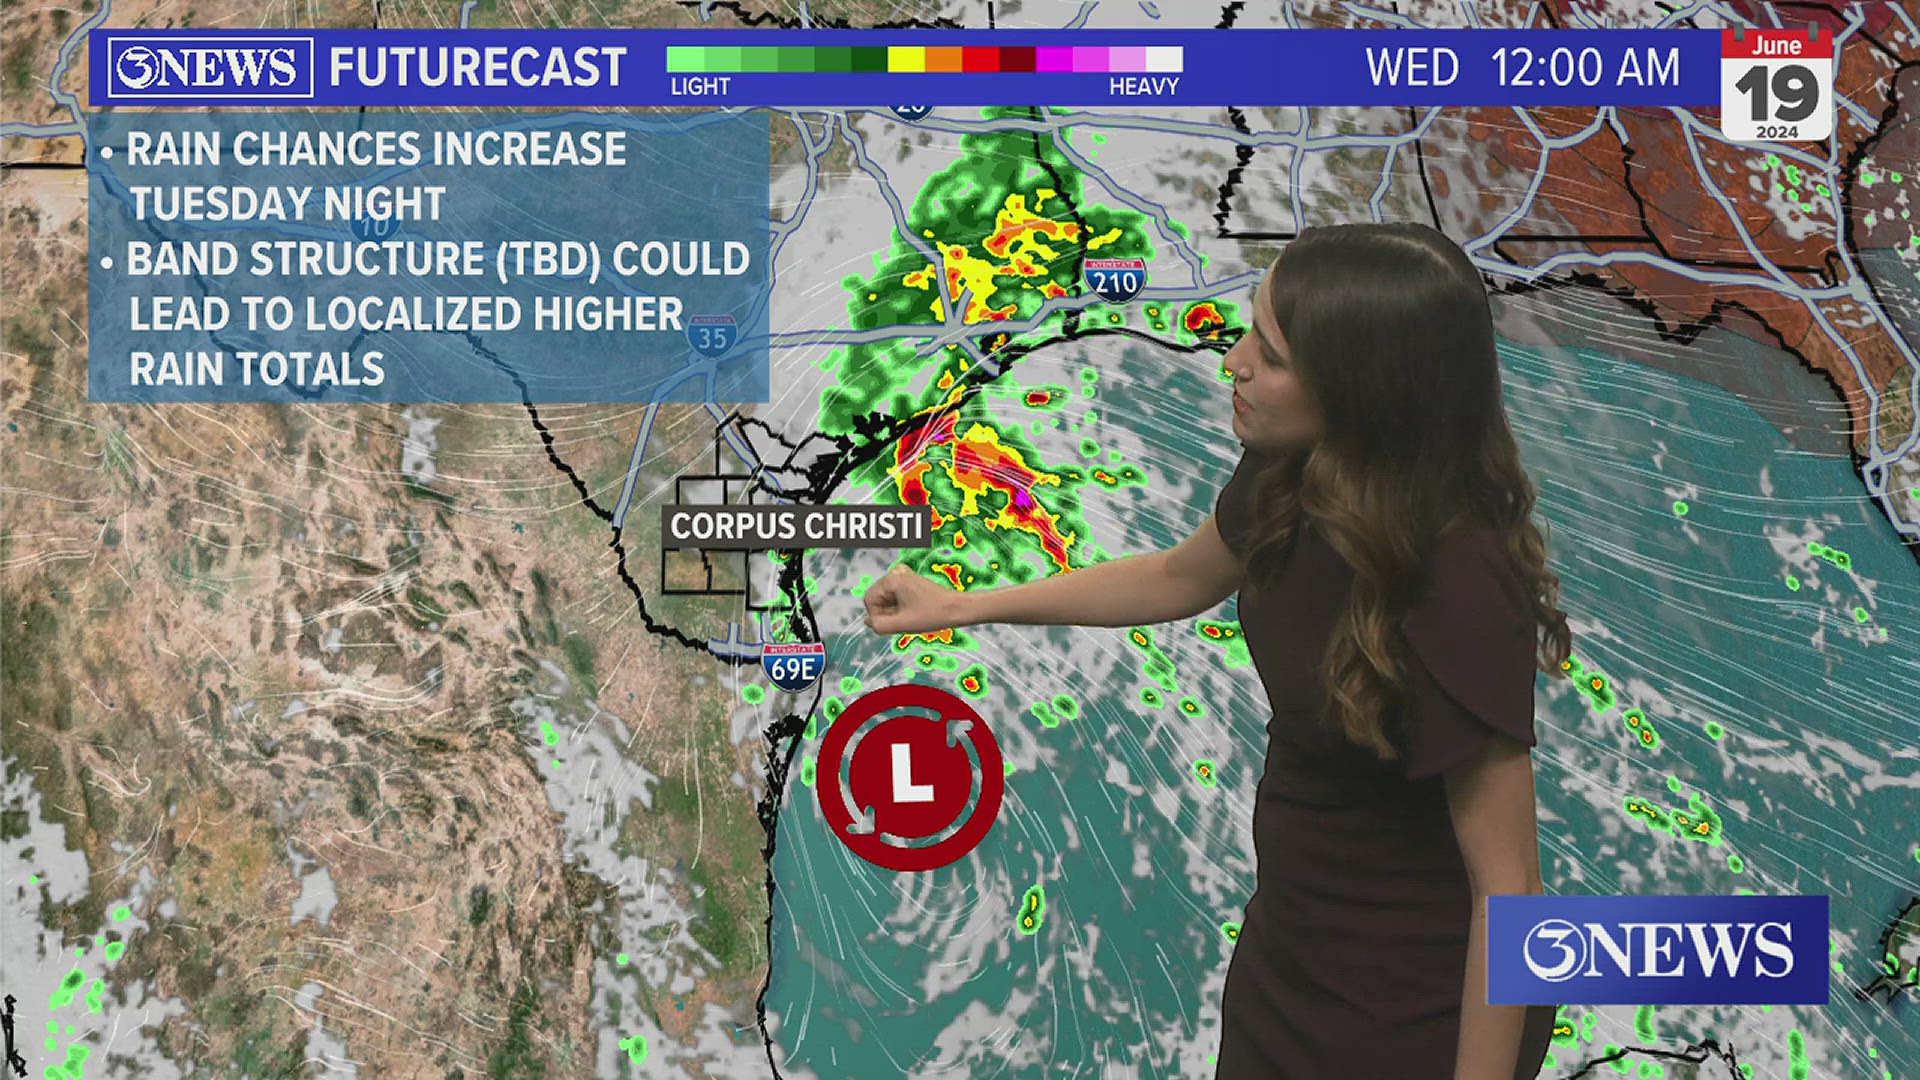 A tropical system will approach the Texas-Mexico border by midweek, bringing heavy rainfall, a flash flood risk, and dangerous beach conditions to the Coastal Bend.